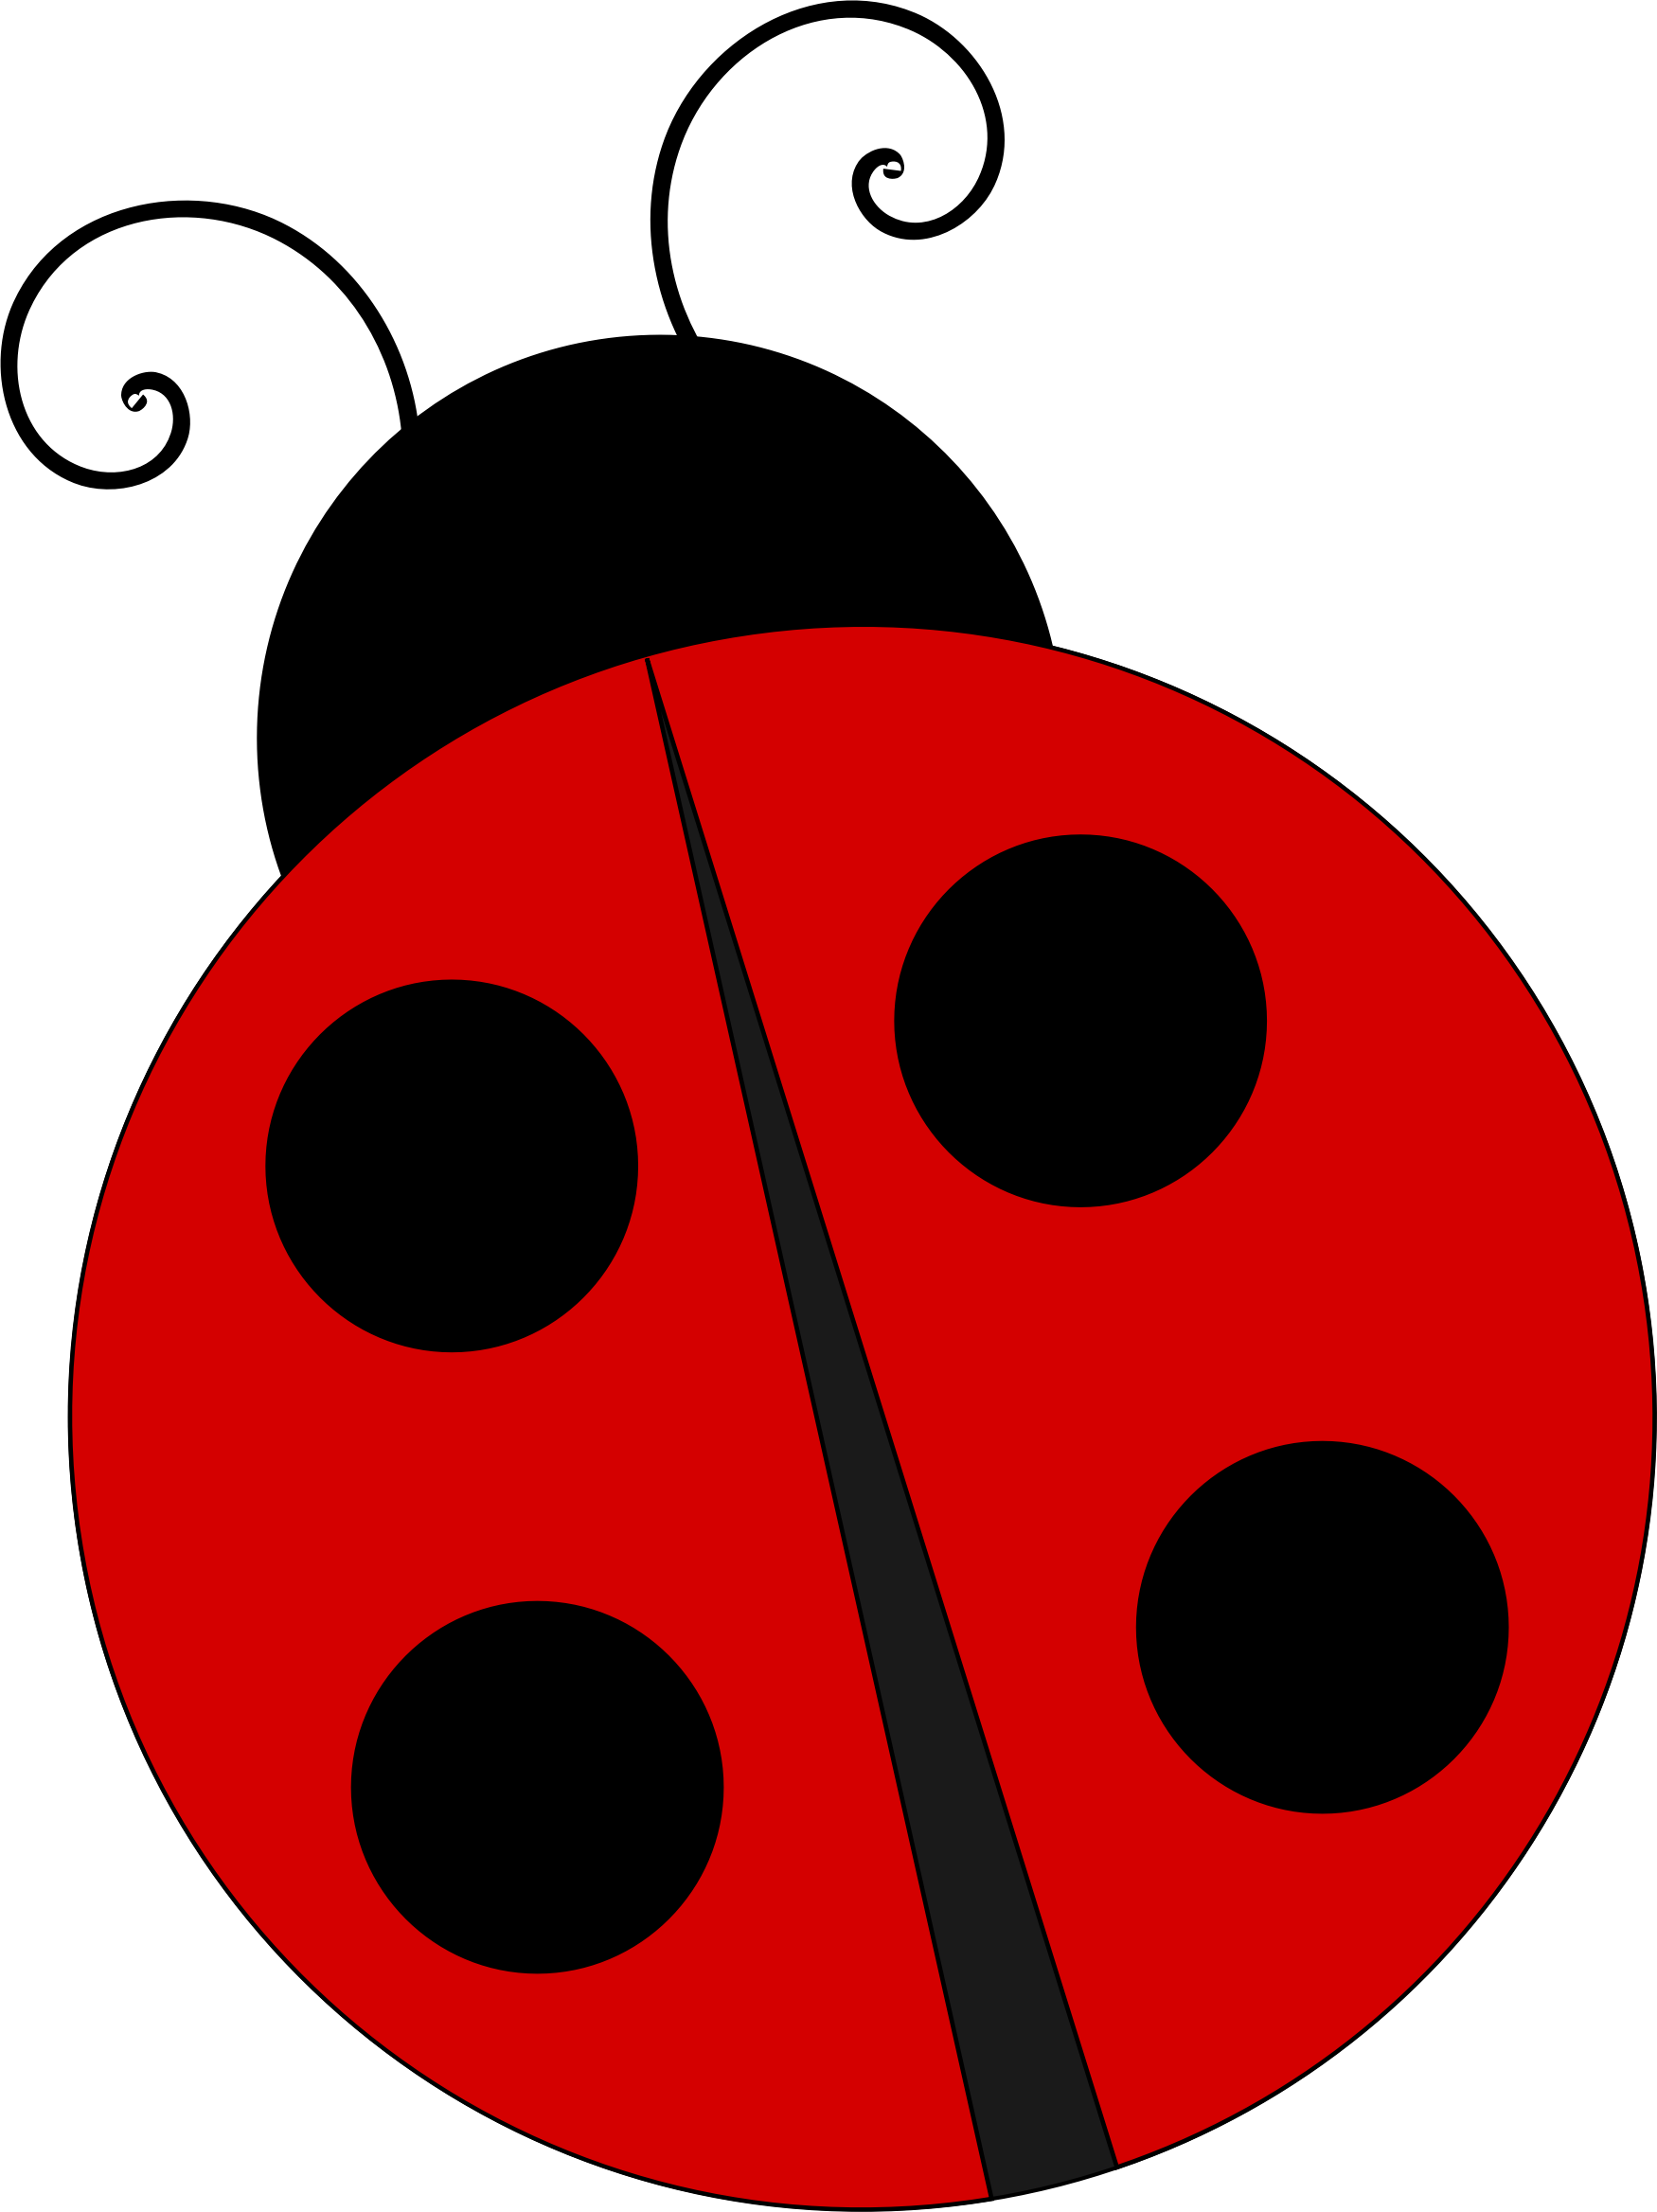 Free ladybug clip art drawings andlorful images 5 - Cliparting.com